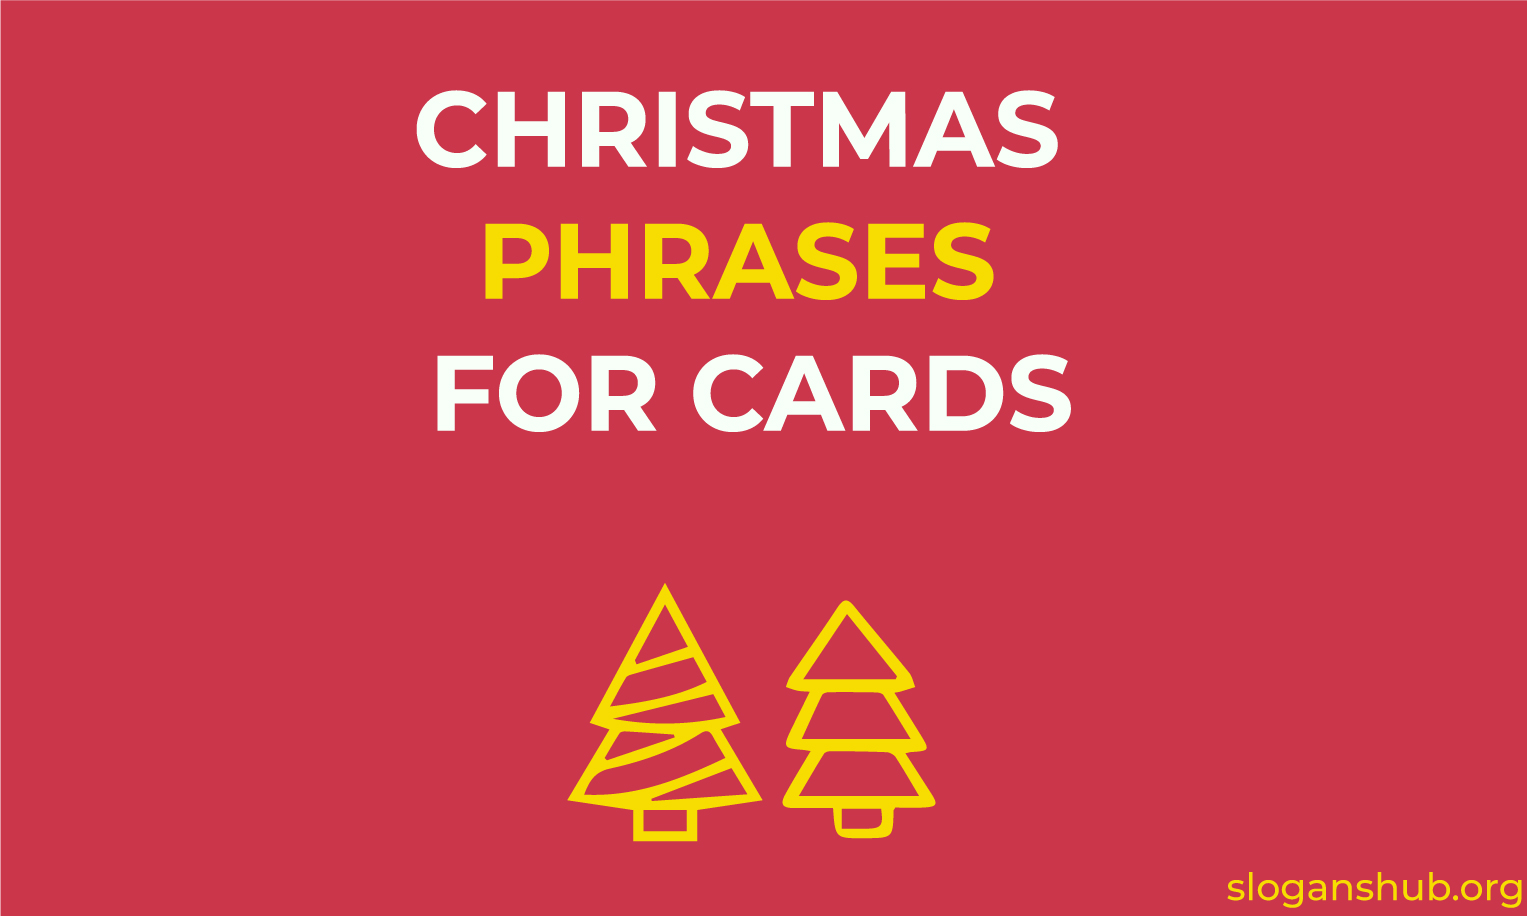 850+ Catchy Christmas Phrases and Christmas Card Phrases